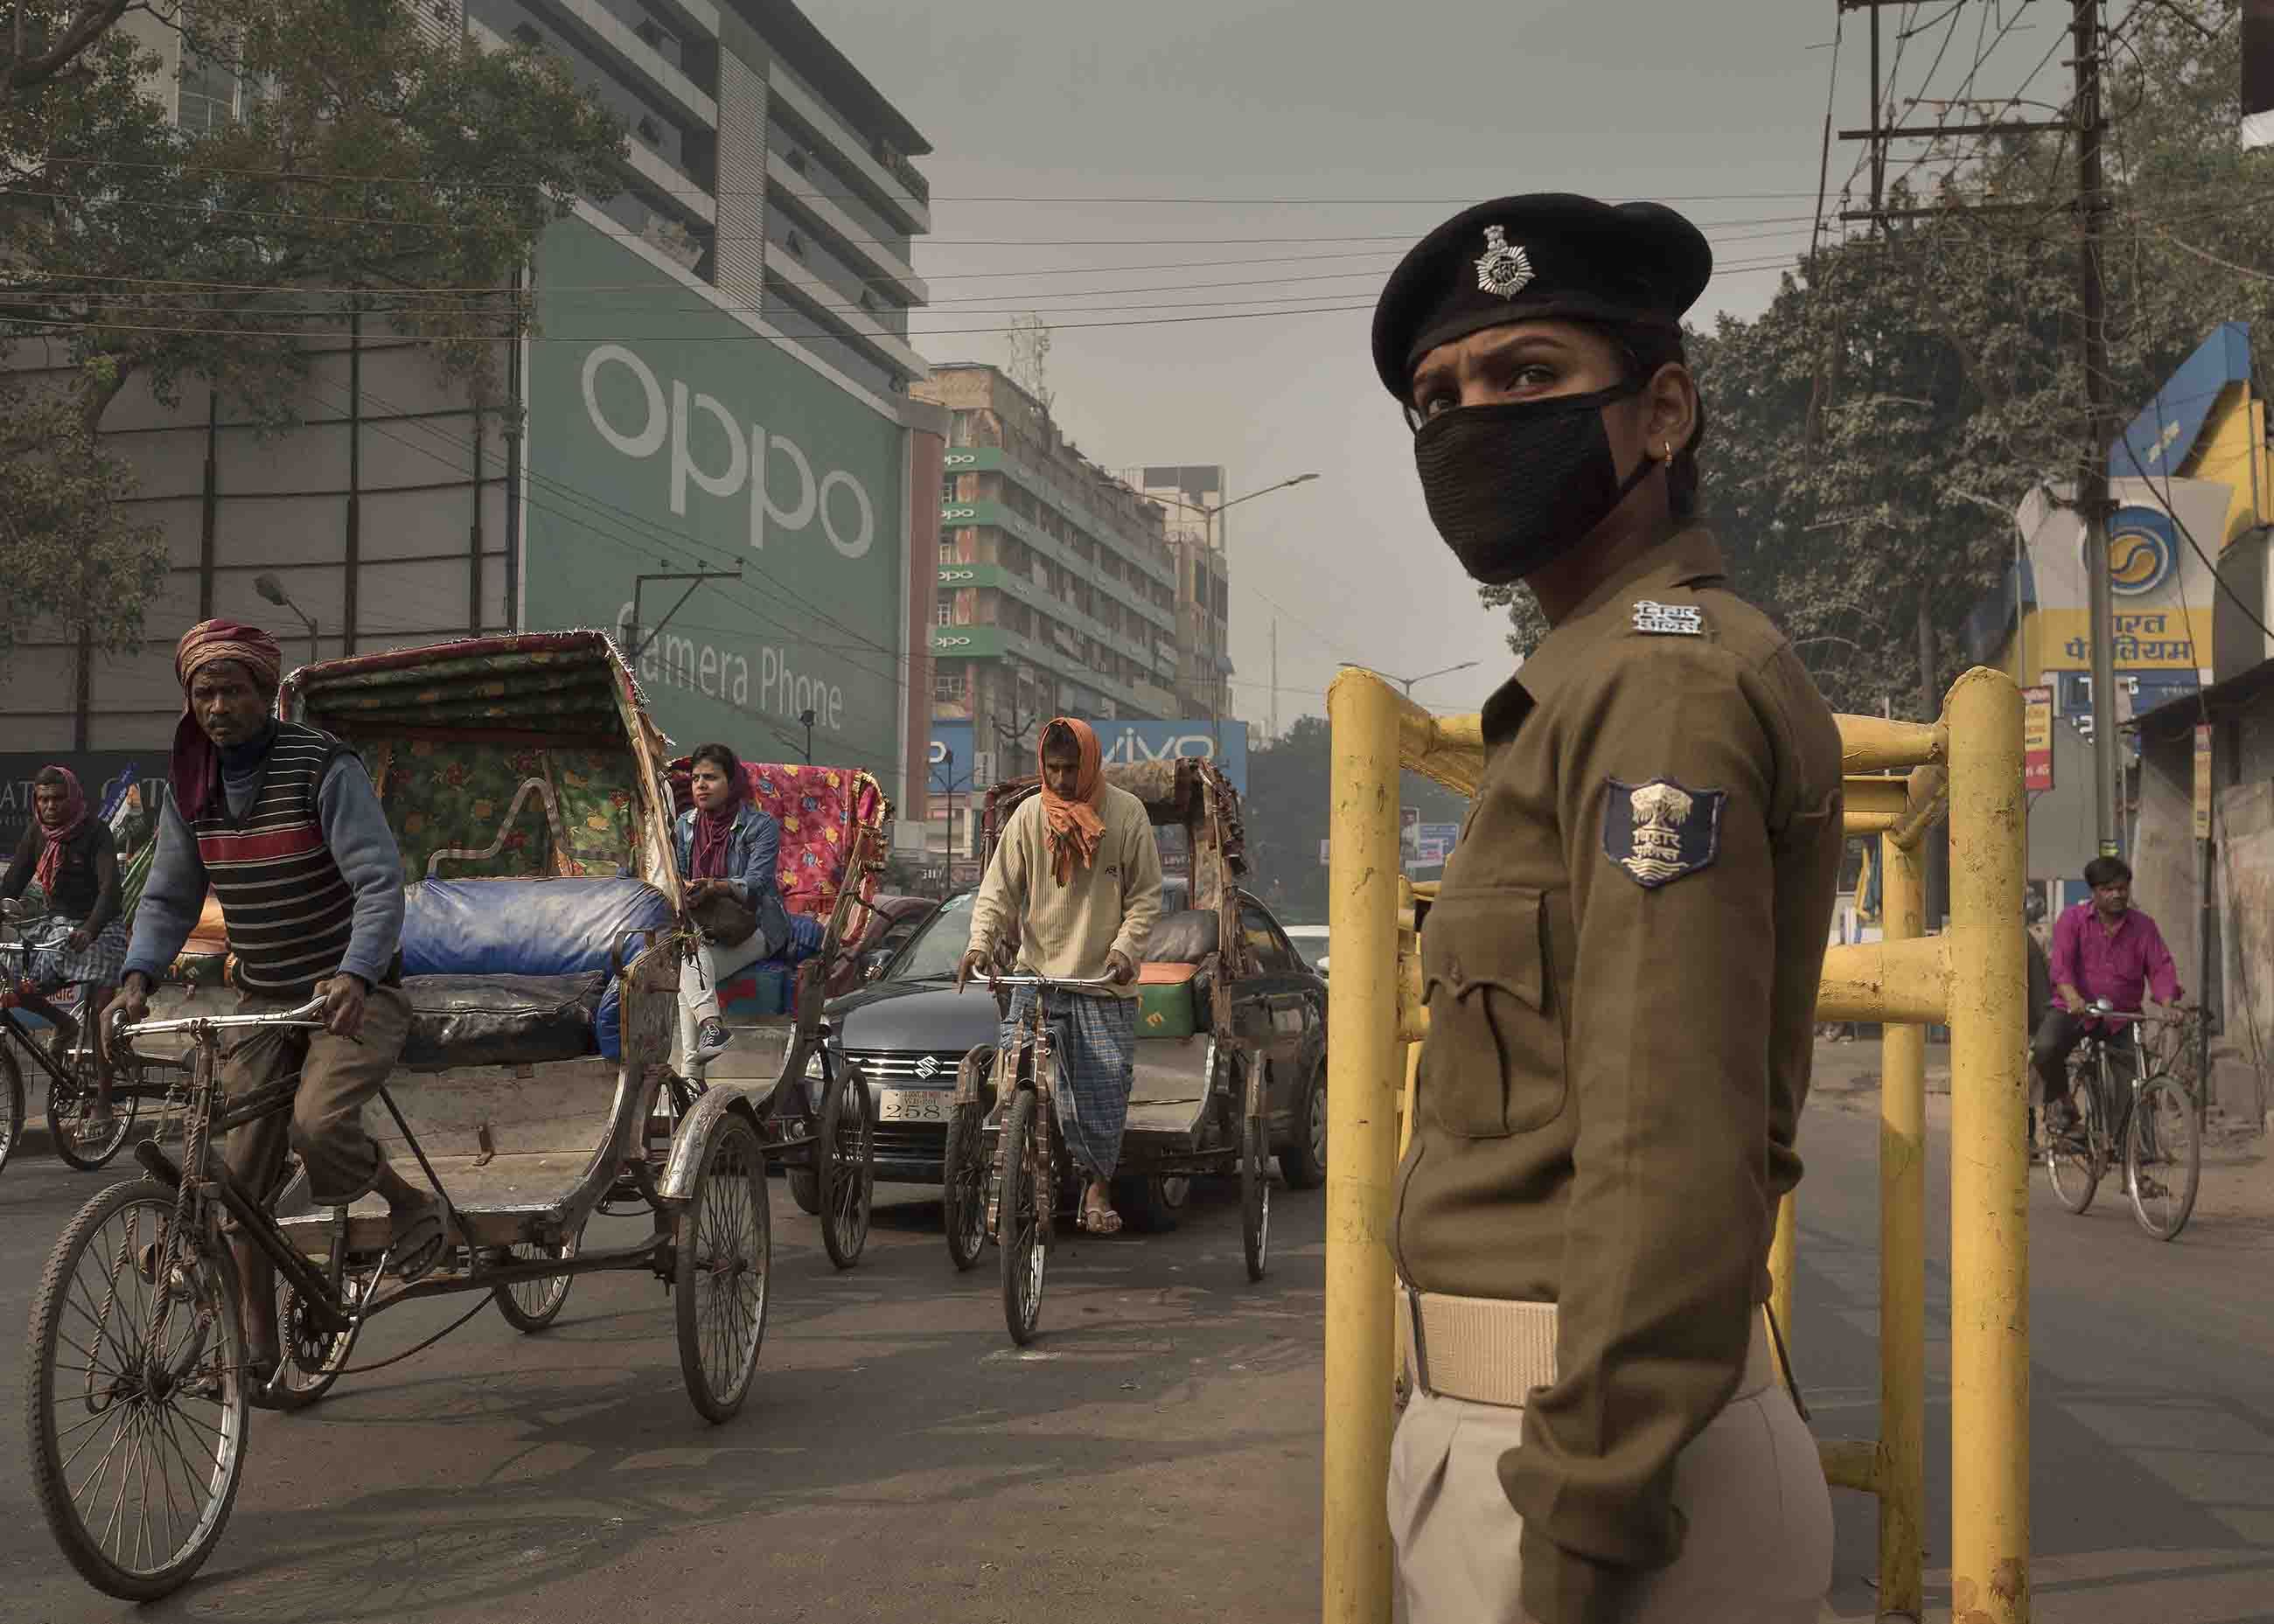 Traffic policewoman Sandhya Bhartj directs traffic in central Patna. Her cloth mask does little to protect her from the smallest particulate pollution. Image by Larry C. Price. India, 2018.